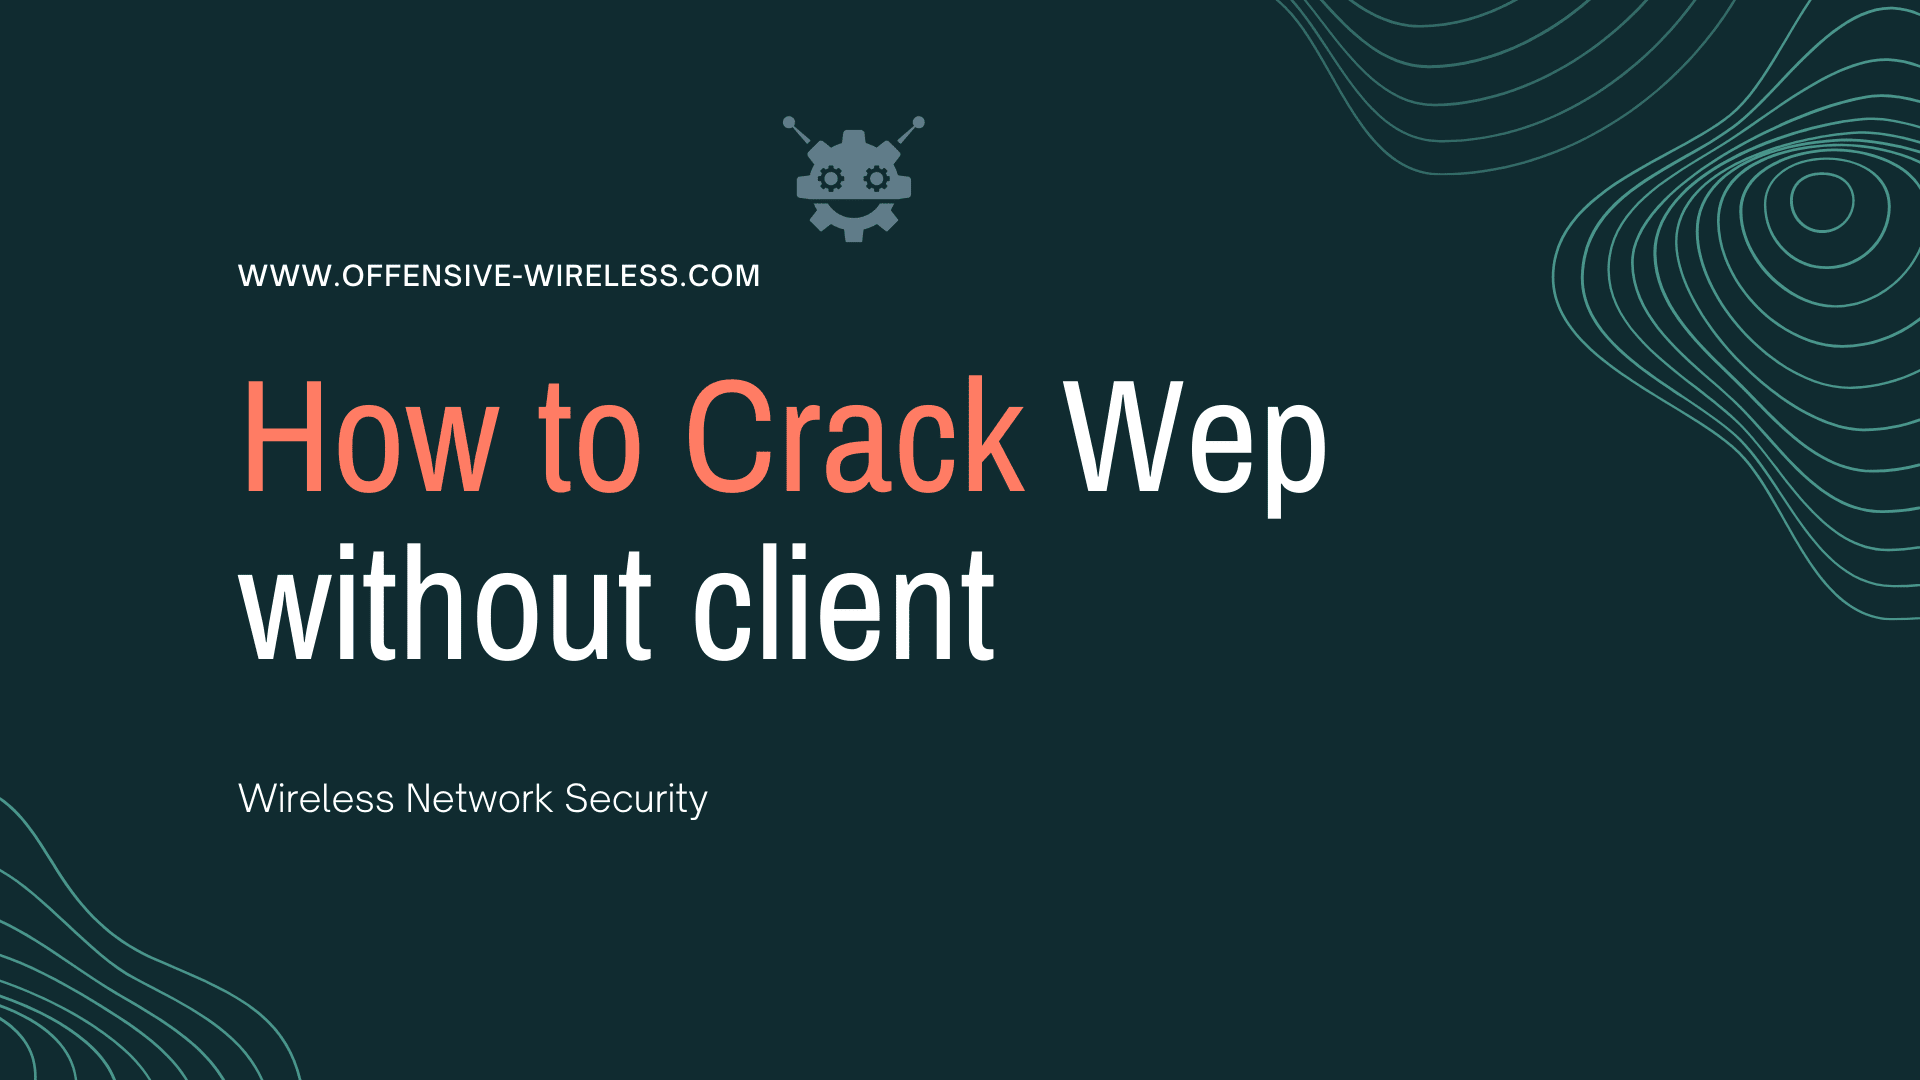 Cracking Clientless WEP Networks